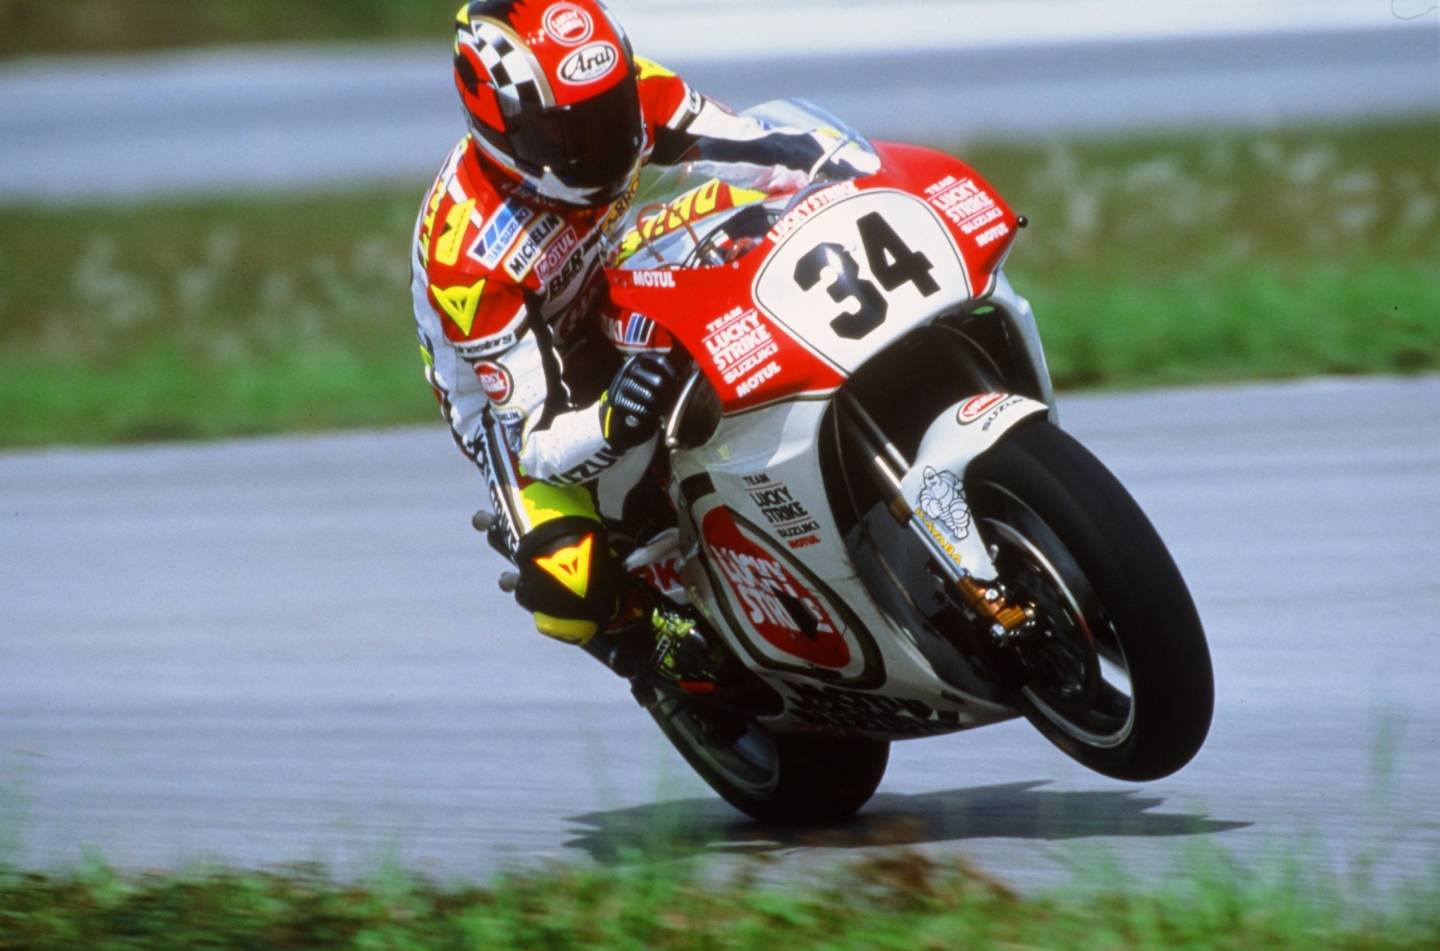 MotoGP Legends Kevin Schwantz and Randy Mamola to attend Classic GP